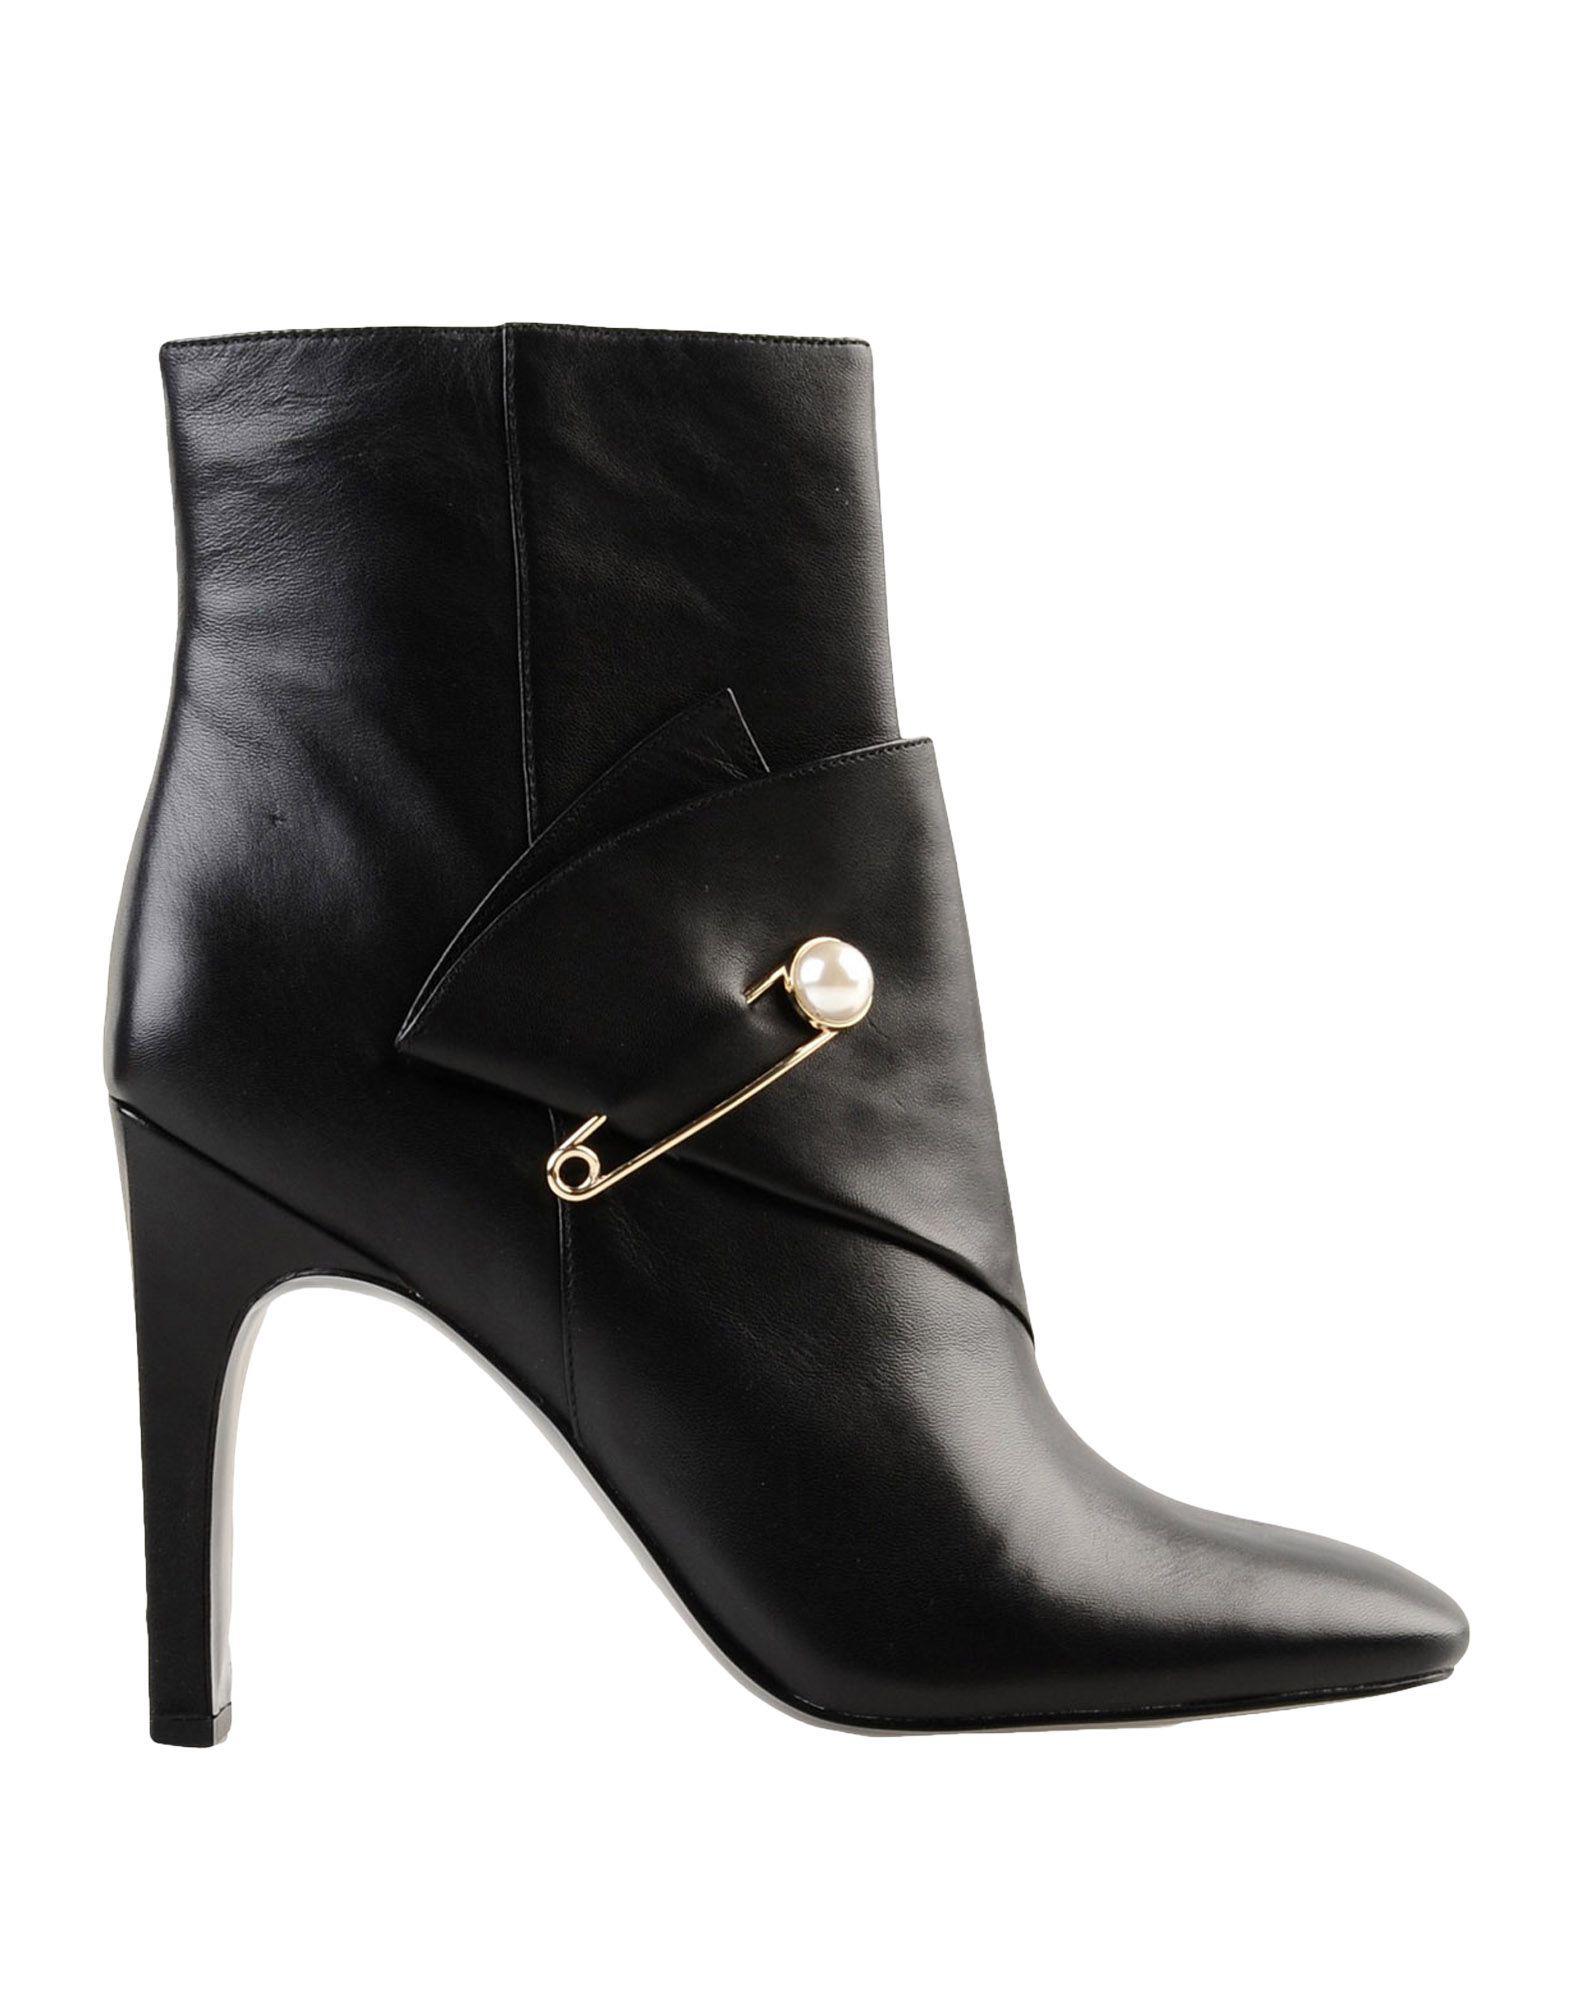 Nine West Ankle Boots in Black - Lyst